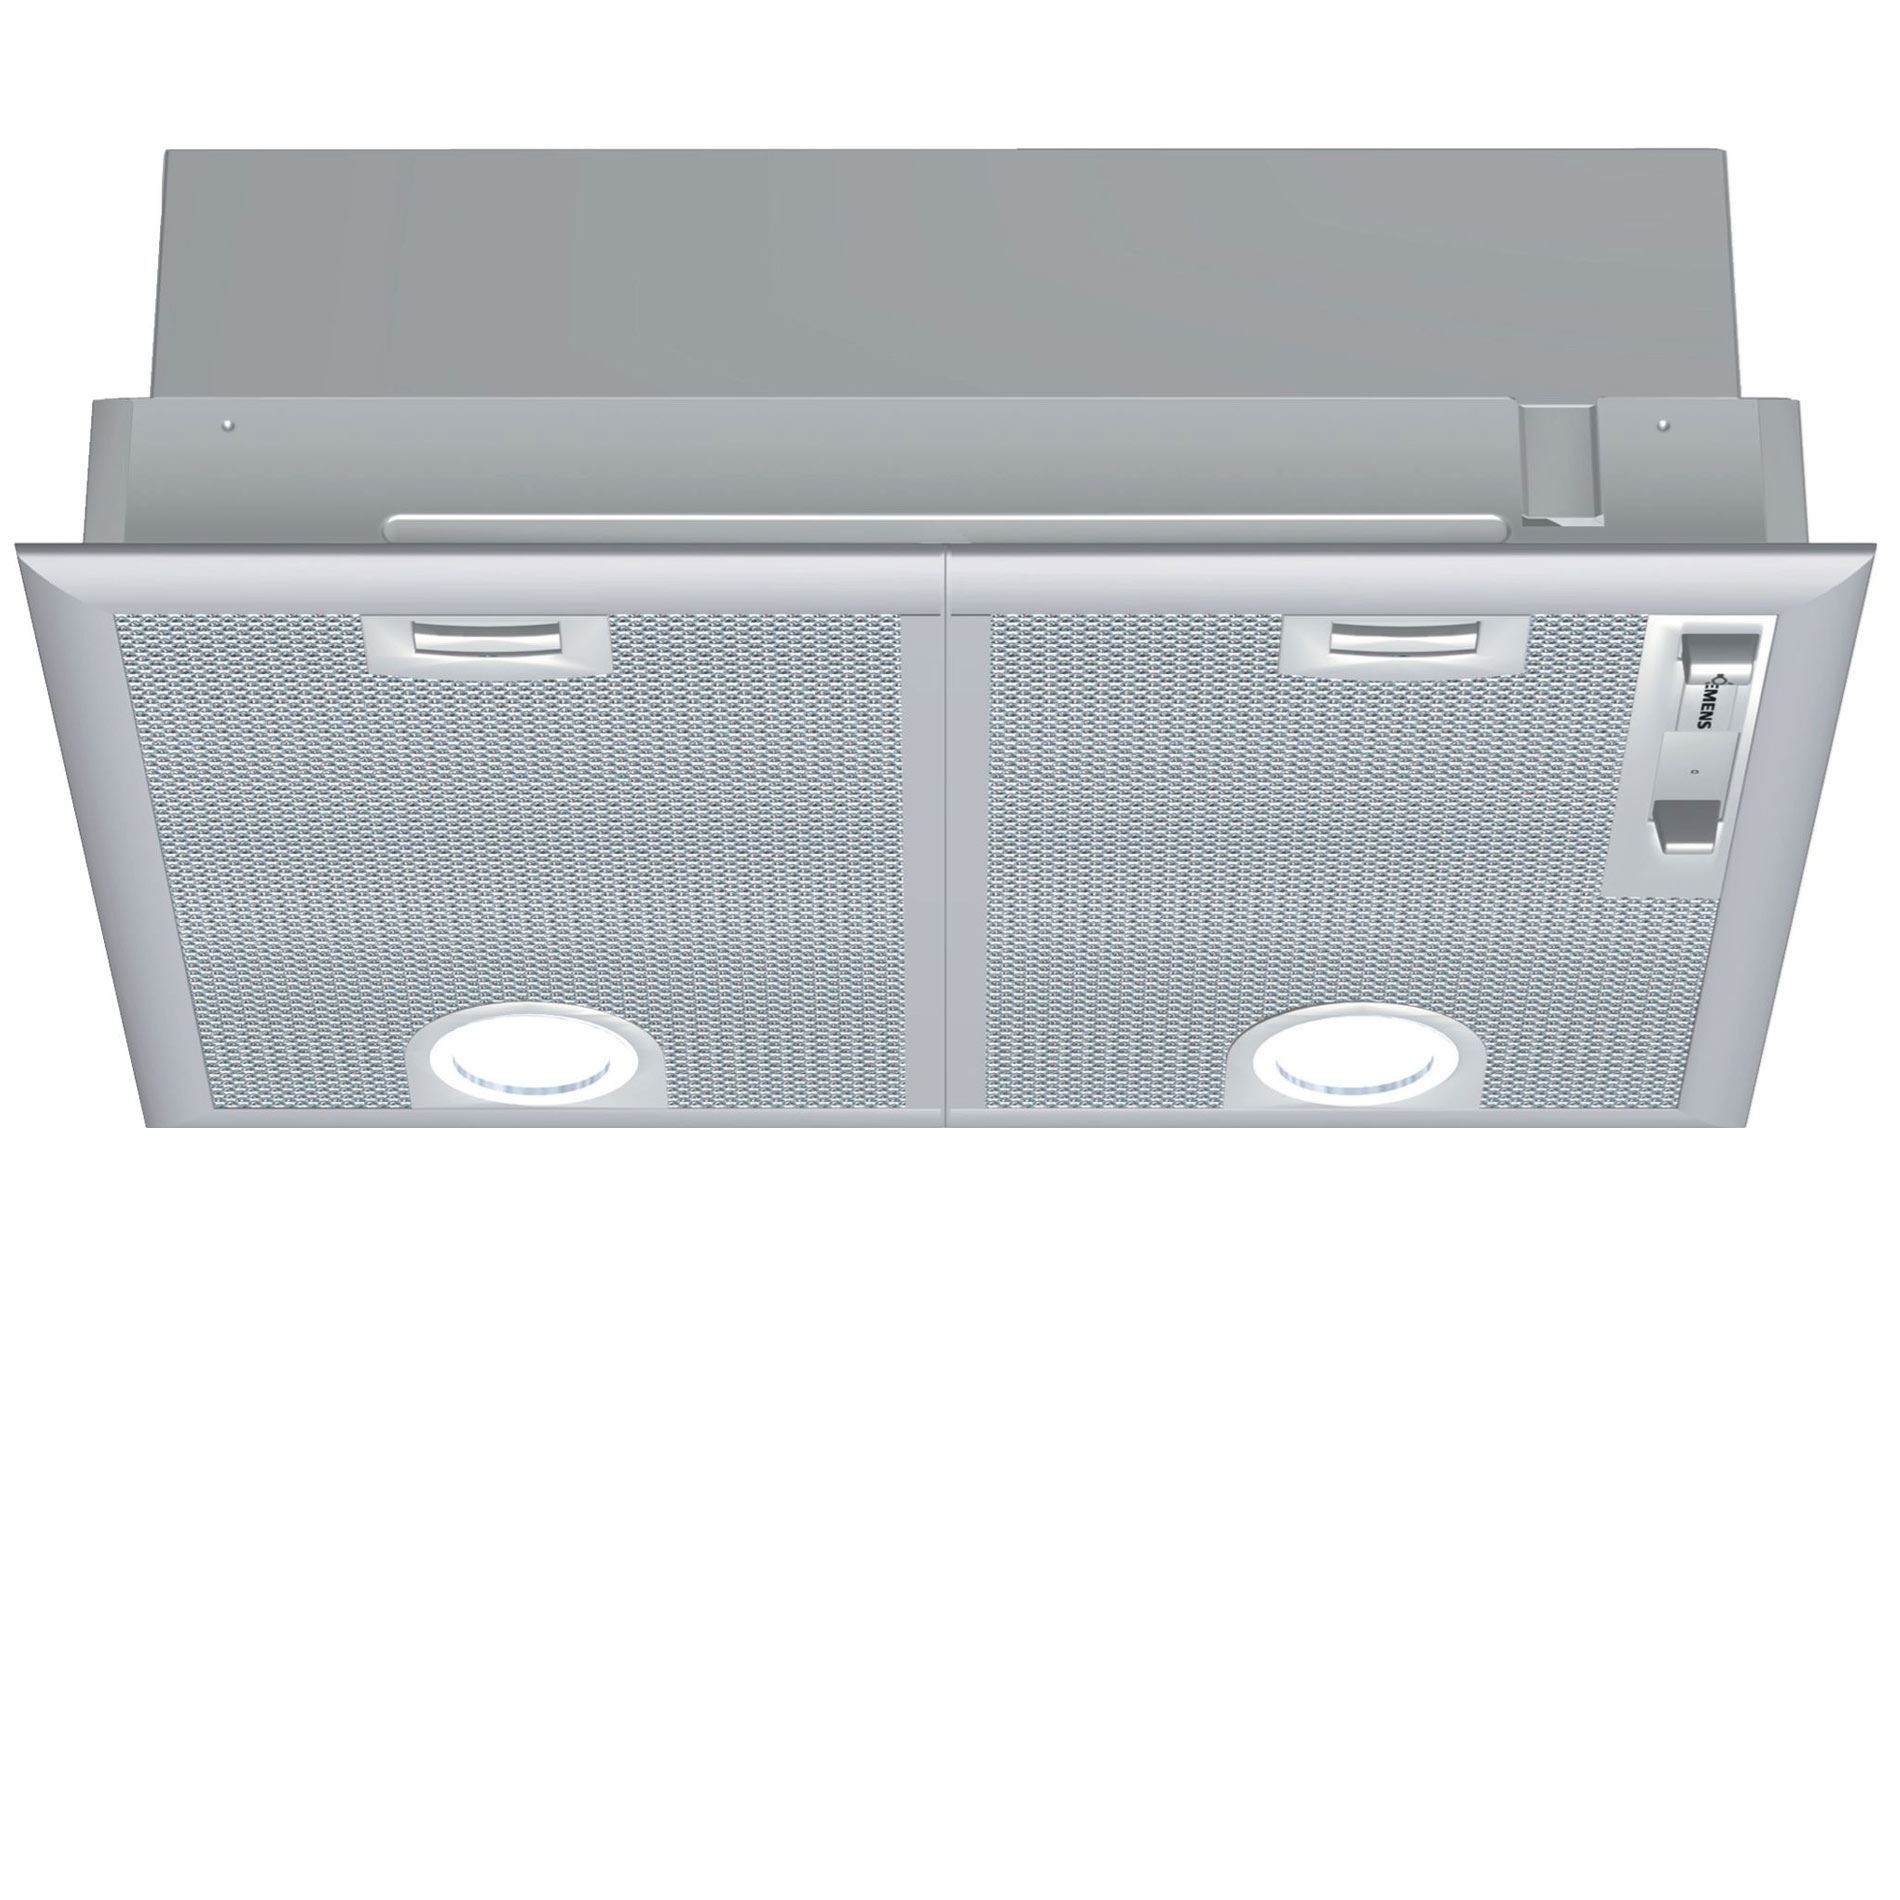 Picture of Siemens LB55565GB Built-In Canopy Hood